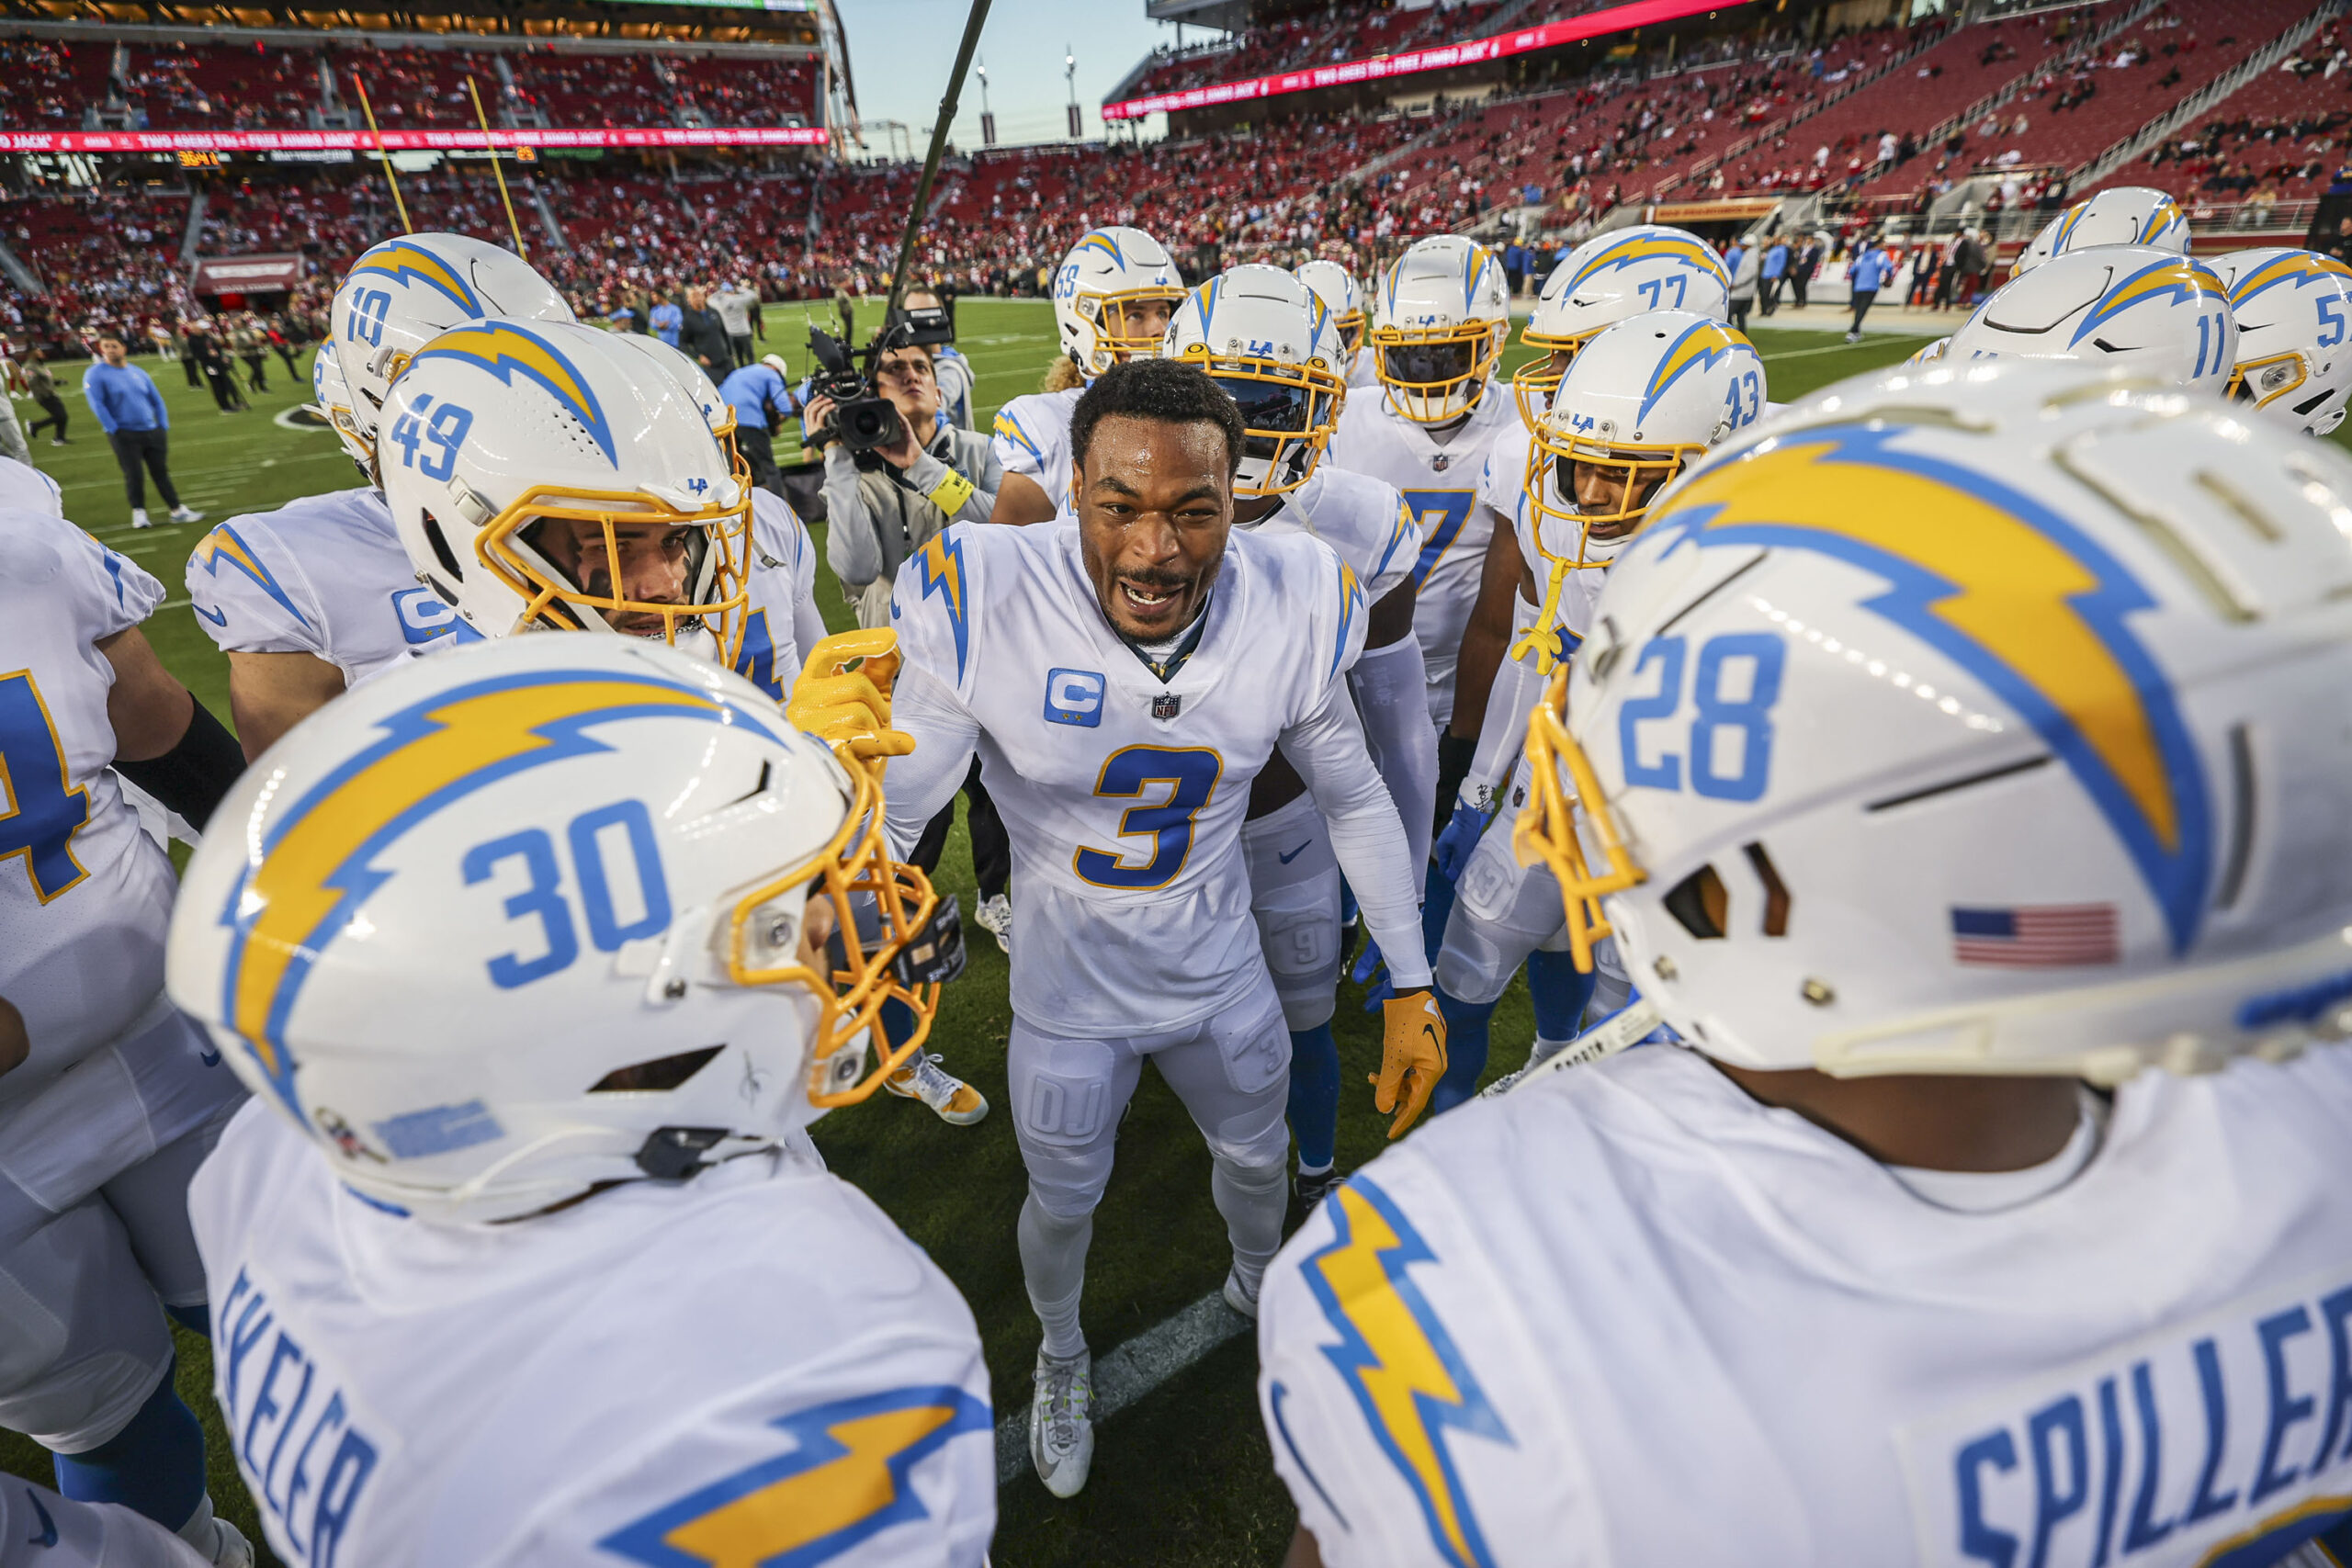 The Los Angeles Chargers lost 22-16 to the San Francisco 49ers